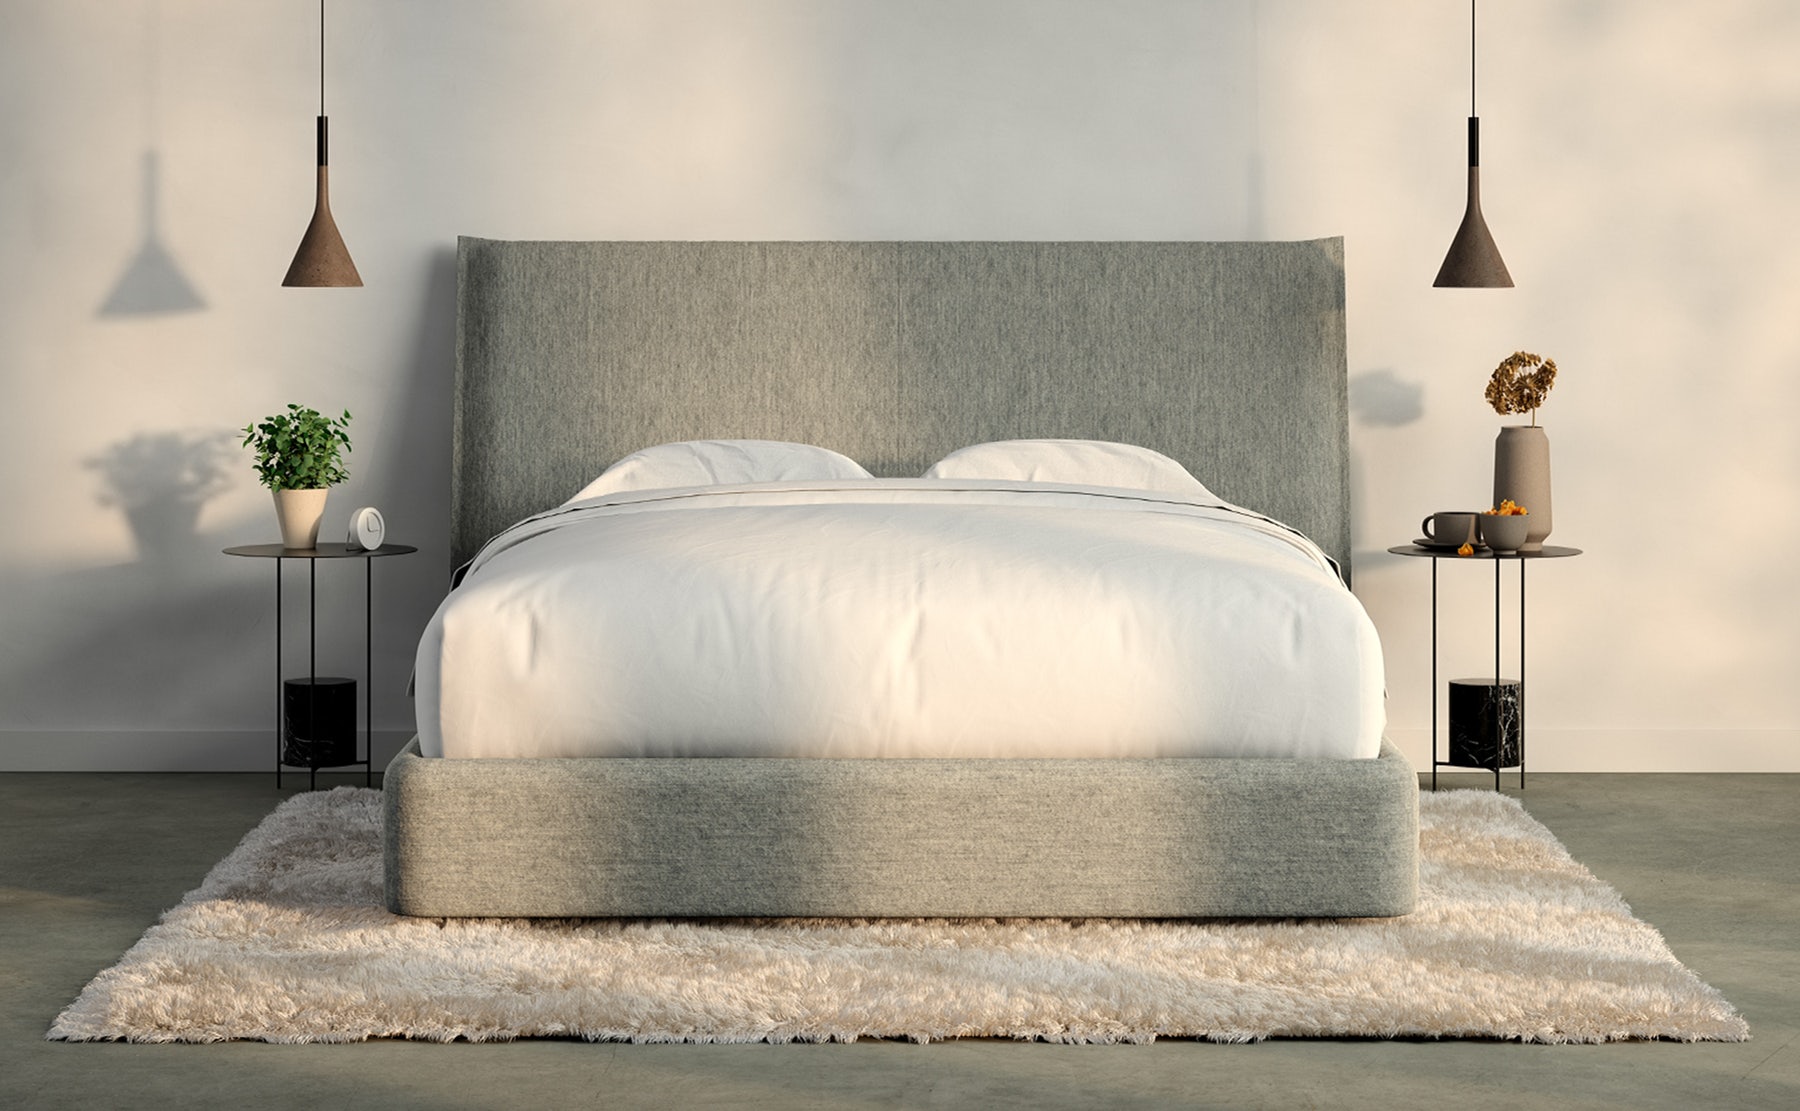 Mattress Sizes And Bed Dimensions Guide, Measurements For A Twin Size Bed Frame